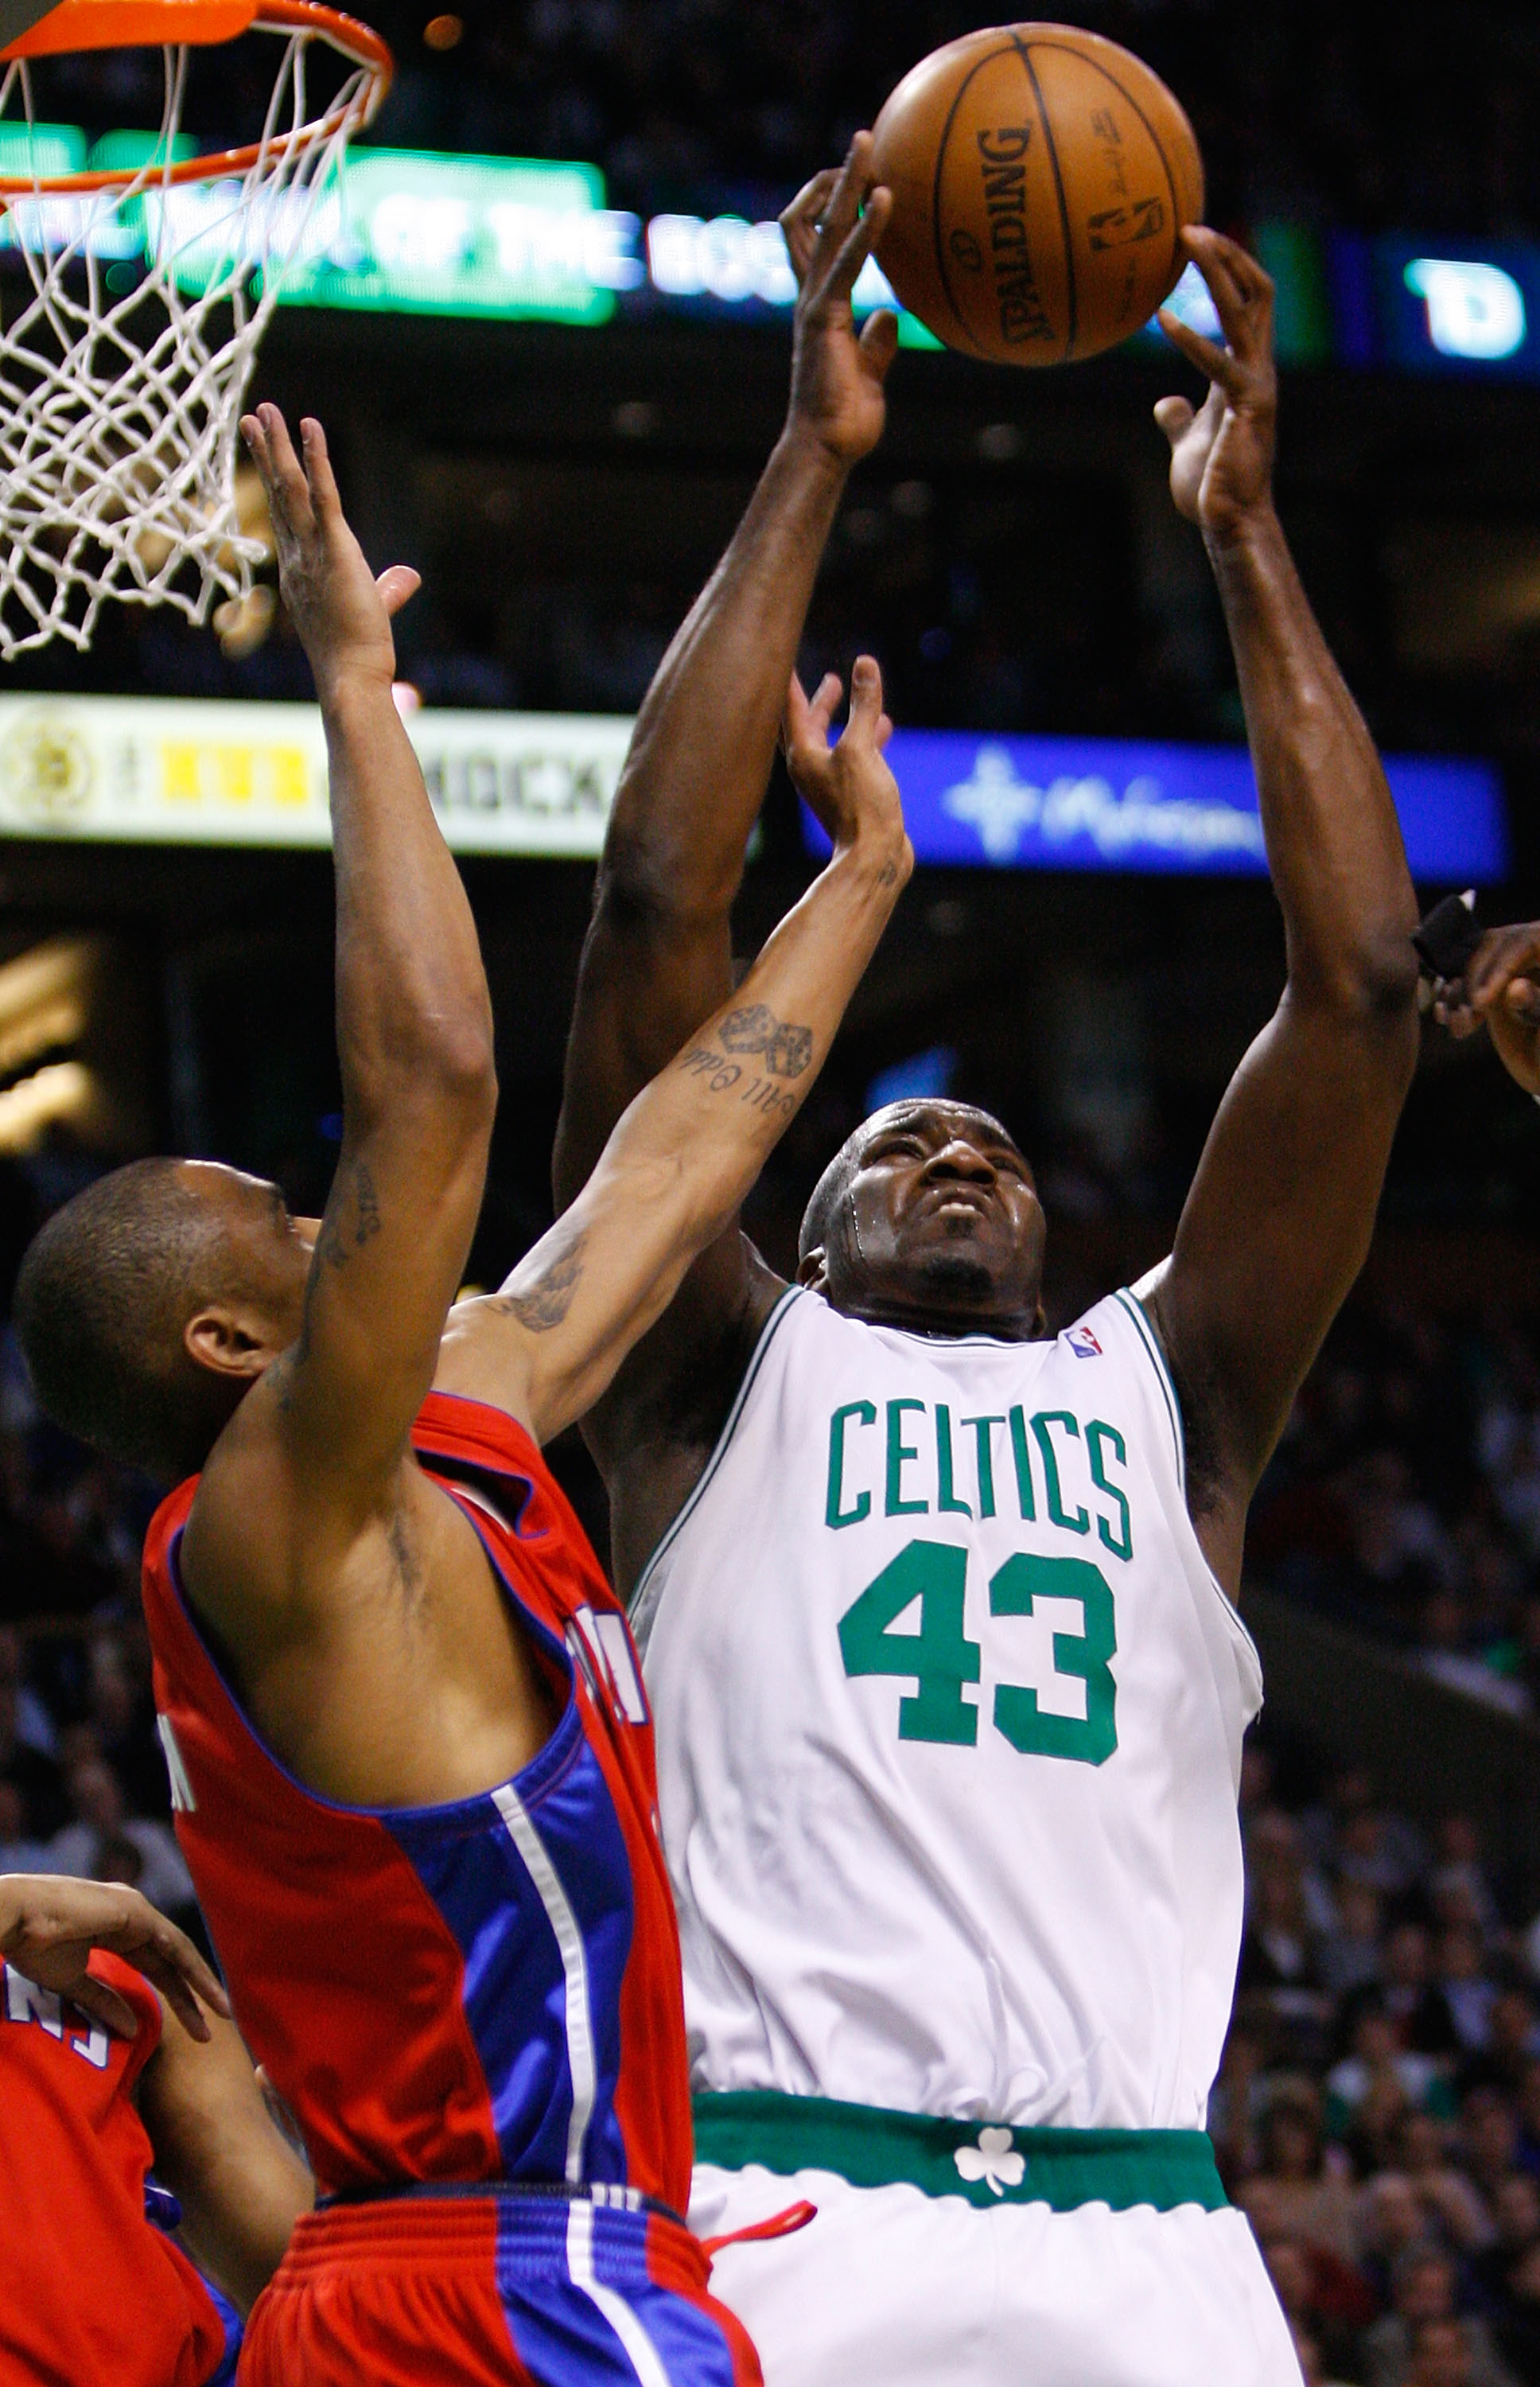 Boston Celtics center Kendrick Perkins, left, battles for a rebound against  New Jersey Nets forward Nenad Krstic, of Serbia and Montenegro, during the  first quarter in Boston, Friday April 14, 2006. (AP